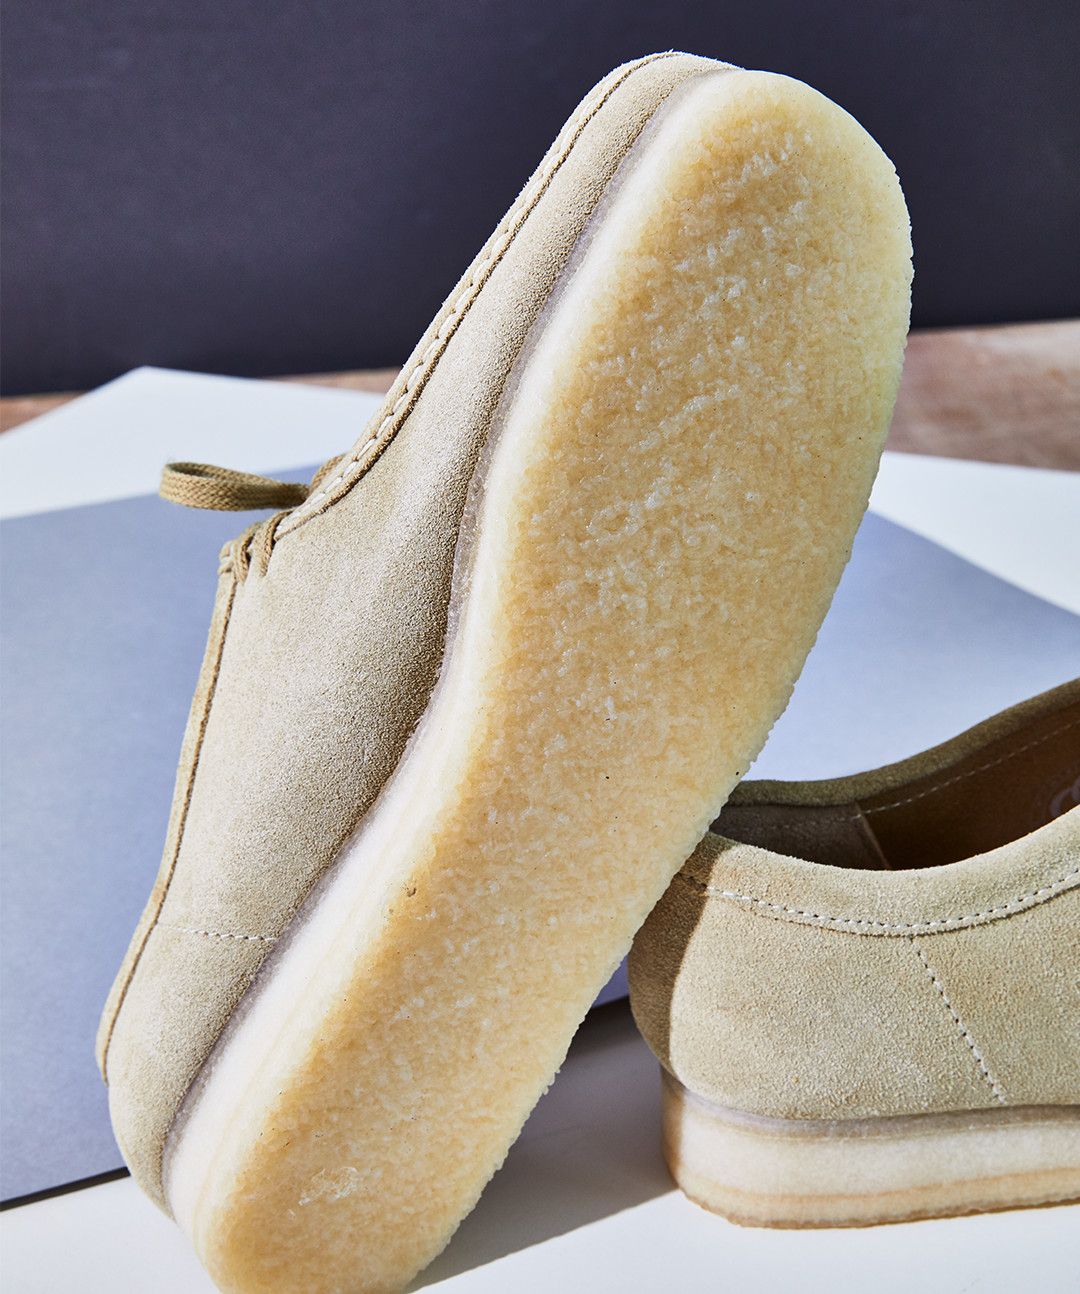 wallabees style shoes